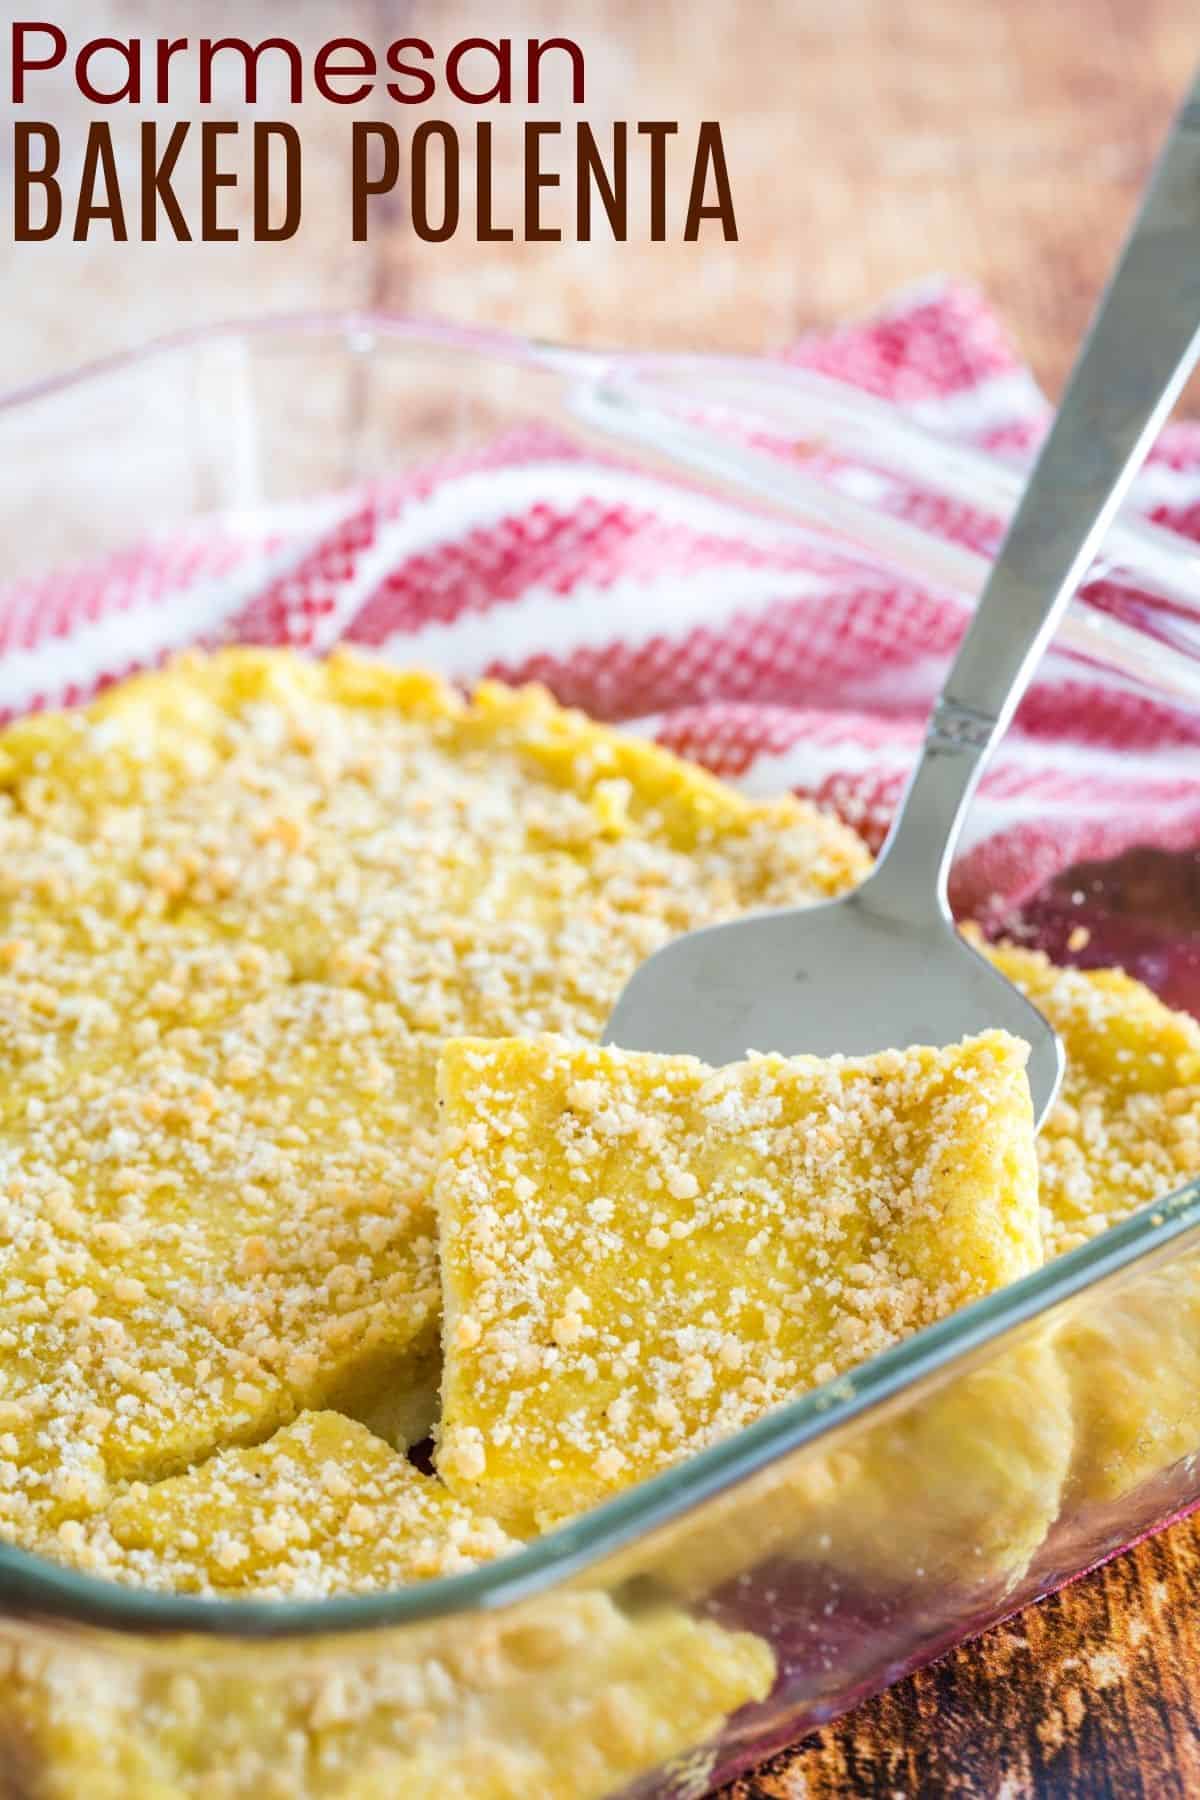 Baked Polenta with Parmesan - easy gluten free side dish!